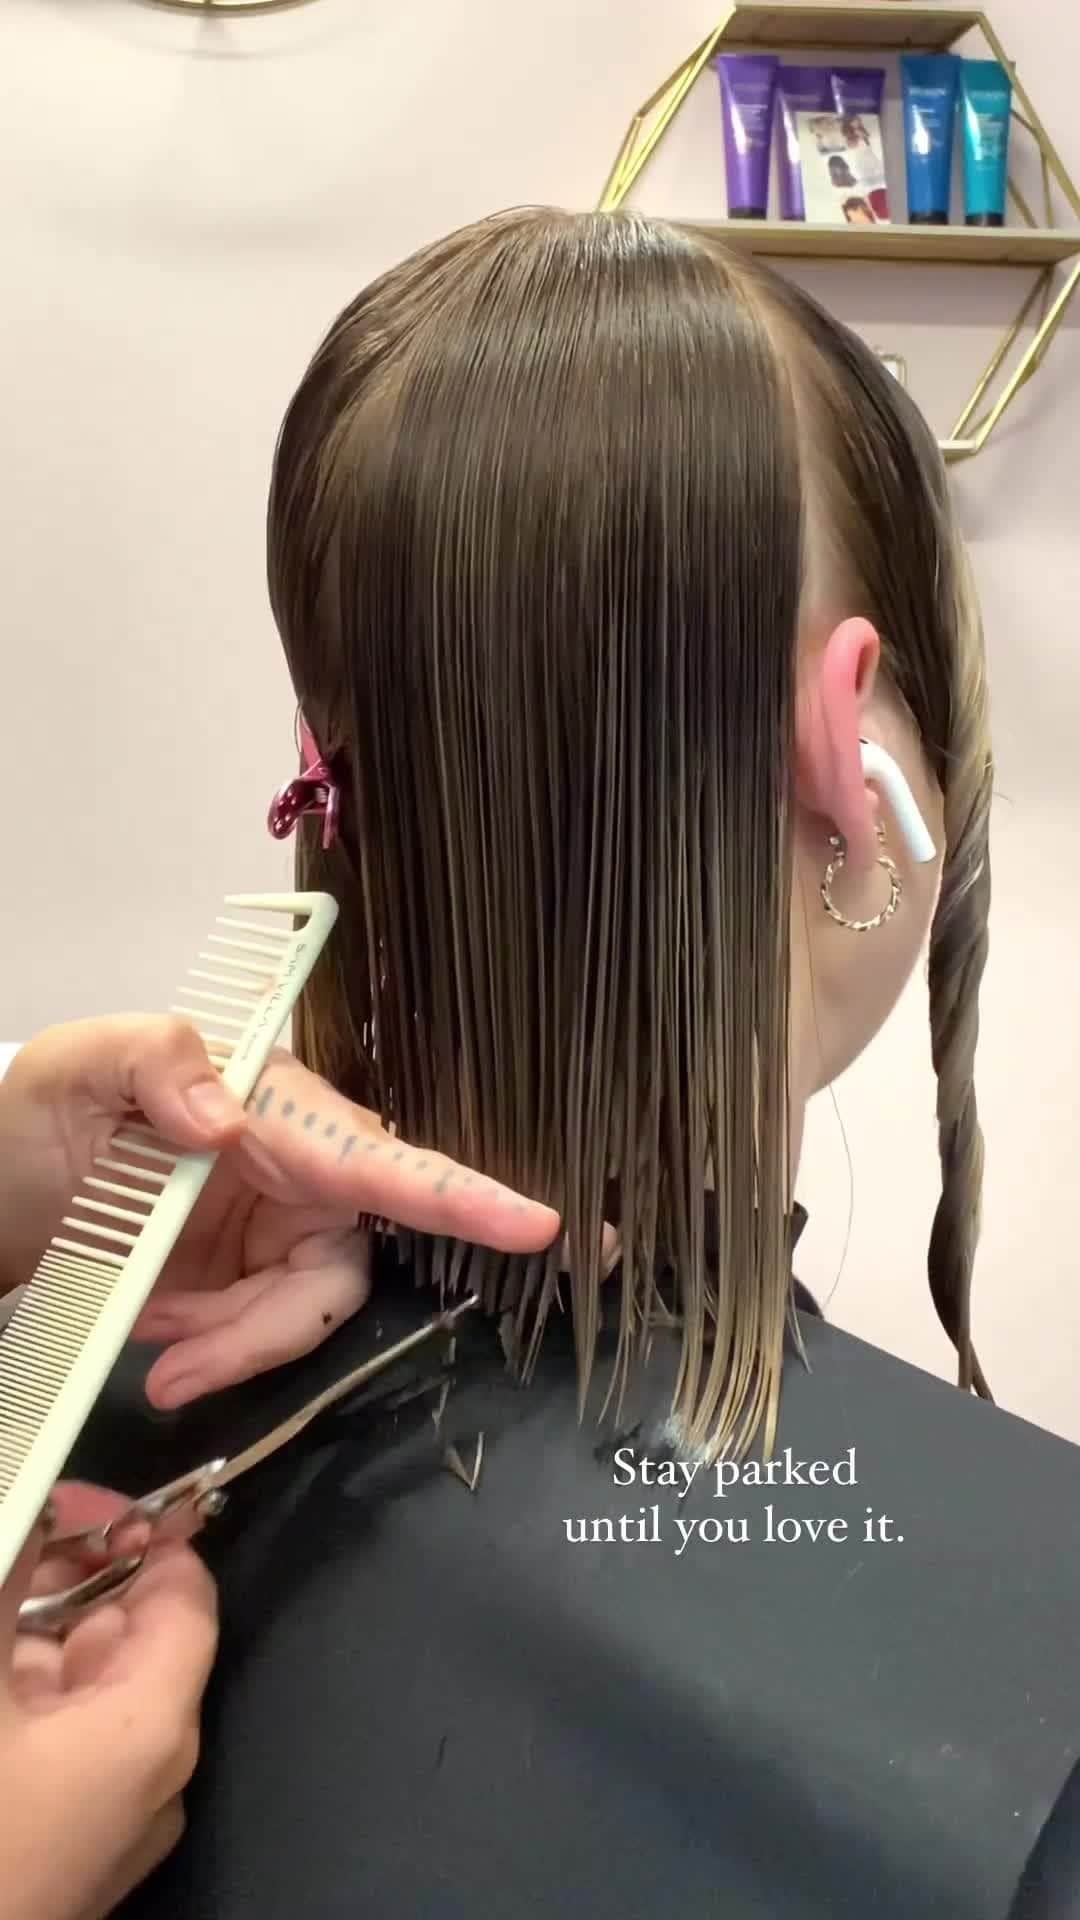 Sam Villaのインスタグラム：「⁠"For consistency from side to side, point cut in both directions." - ⁠ @jamiemcdhair, Sam Villa Ambassador and @Redken Artist⁠ ⁠ SAVE this tip. 🔖⁠ ⁠ Tool Used:⁠ Sam Villa Streamline Series Shear⁠ ⁠ About These Shears: ⁠ Contoured blades and a highly sculpted handle give you incredible precision control, while the lightweight design makes this shear comfortable to hold all day long. Transform the way you work with our Streamline Series Shear.⁠ ⁠ #SamVilla⁠ #SamVillaCommunity⁠ #SVAmbassador ⁠ .⁠ .⁠ .⁠ .⁠ .⁠ .⁠ #haircutting #samvilla #hairtutorial #hairvideo #haircut #hairstylist #behindthechair #modernsalon #americansalon #redken #redkenready #redkenobsessed」